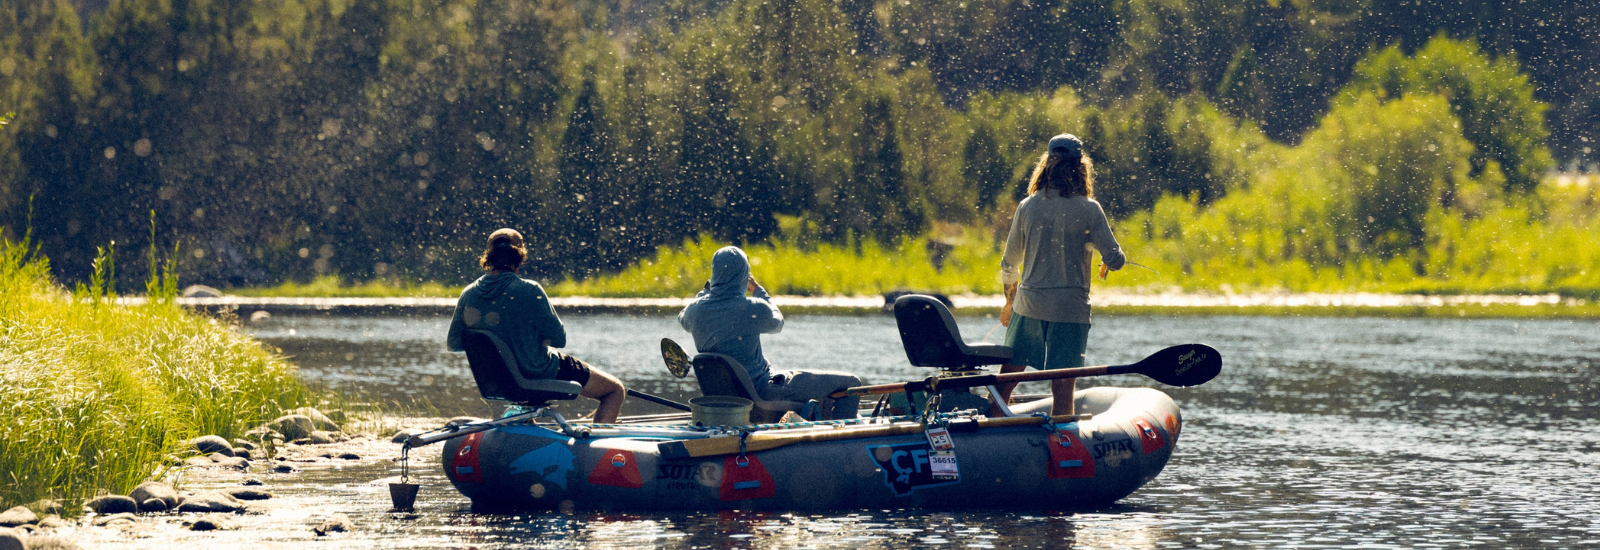 10 Bucket-List Fishing Trips in North America - Game & Fish